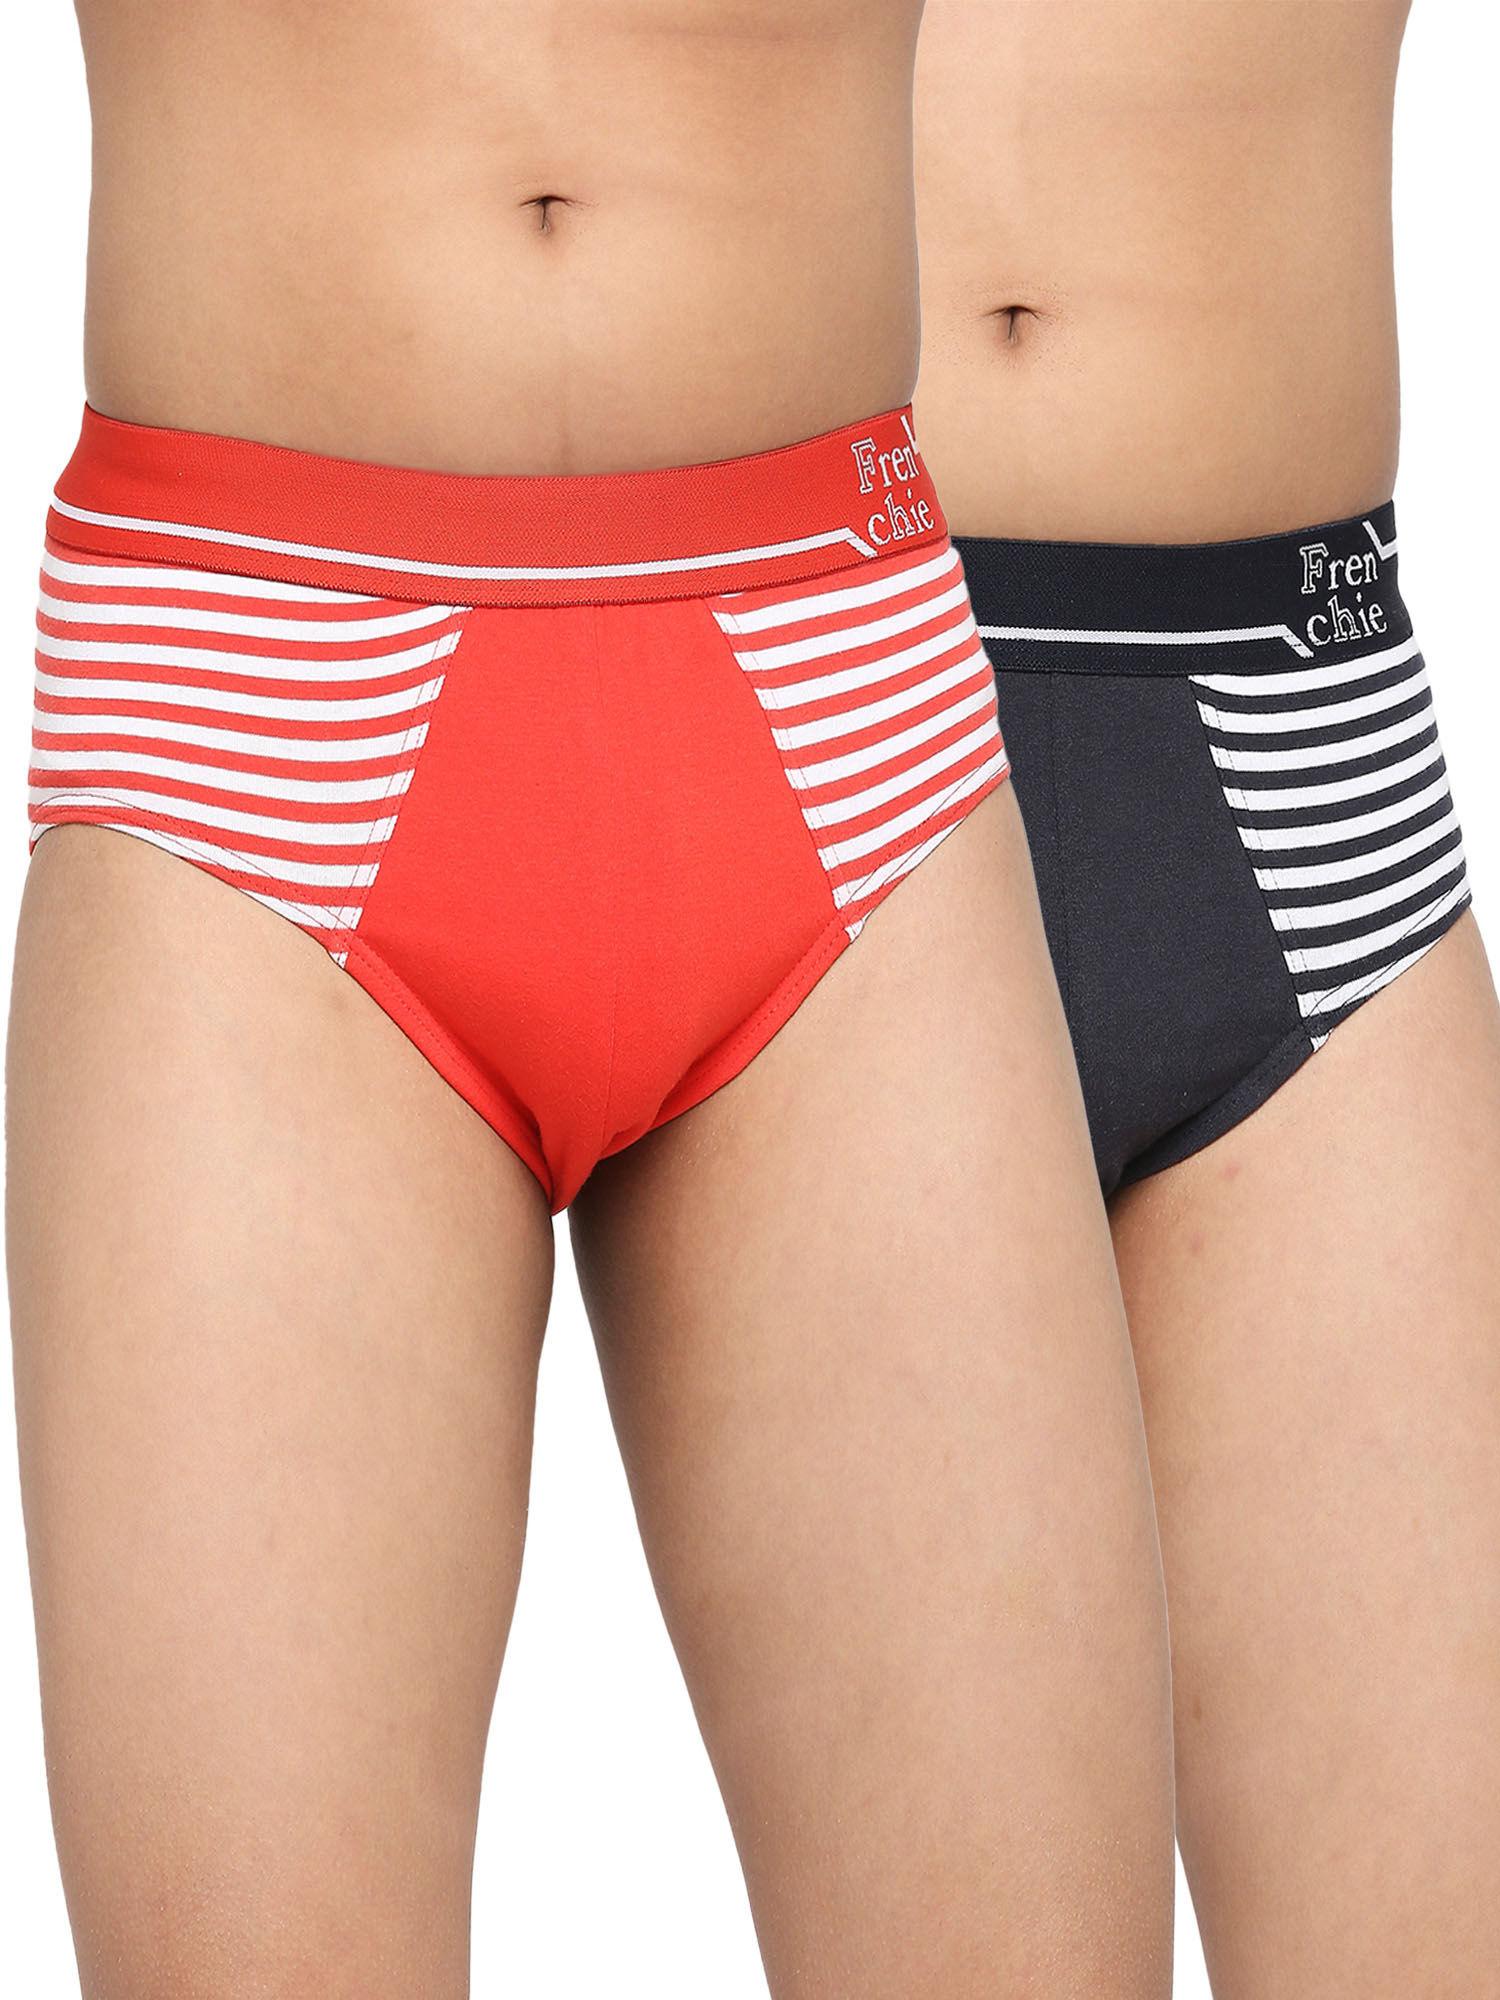 teenagers-cotton-brief-navy-blue-and-red-(pack-of-2)